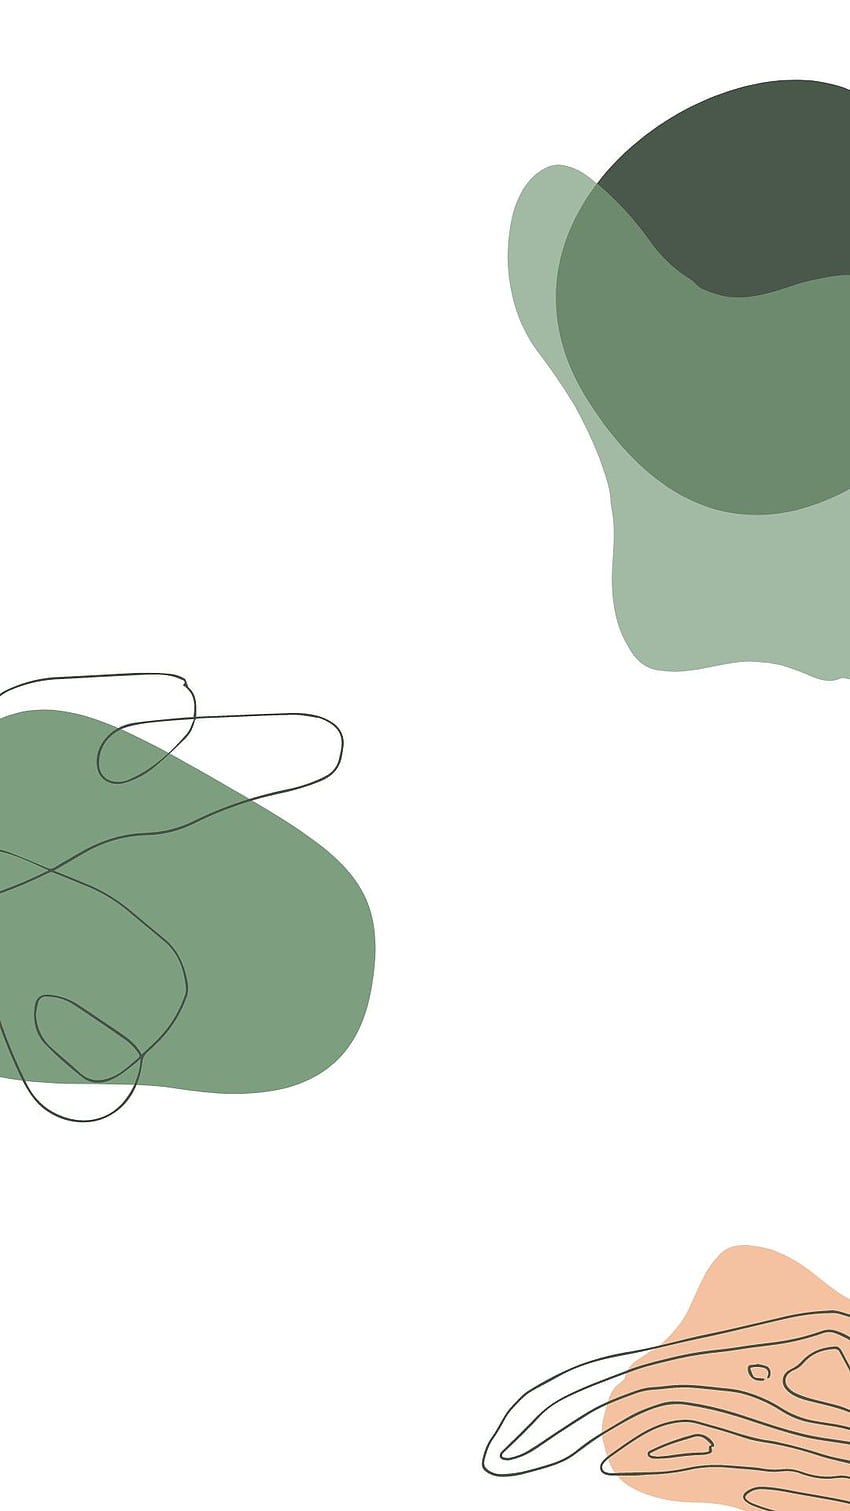 An abstract illustration of shapes in green, beige and black. - Green, sage green